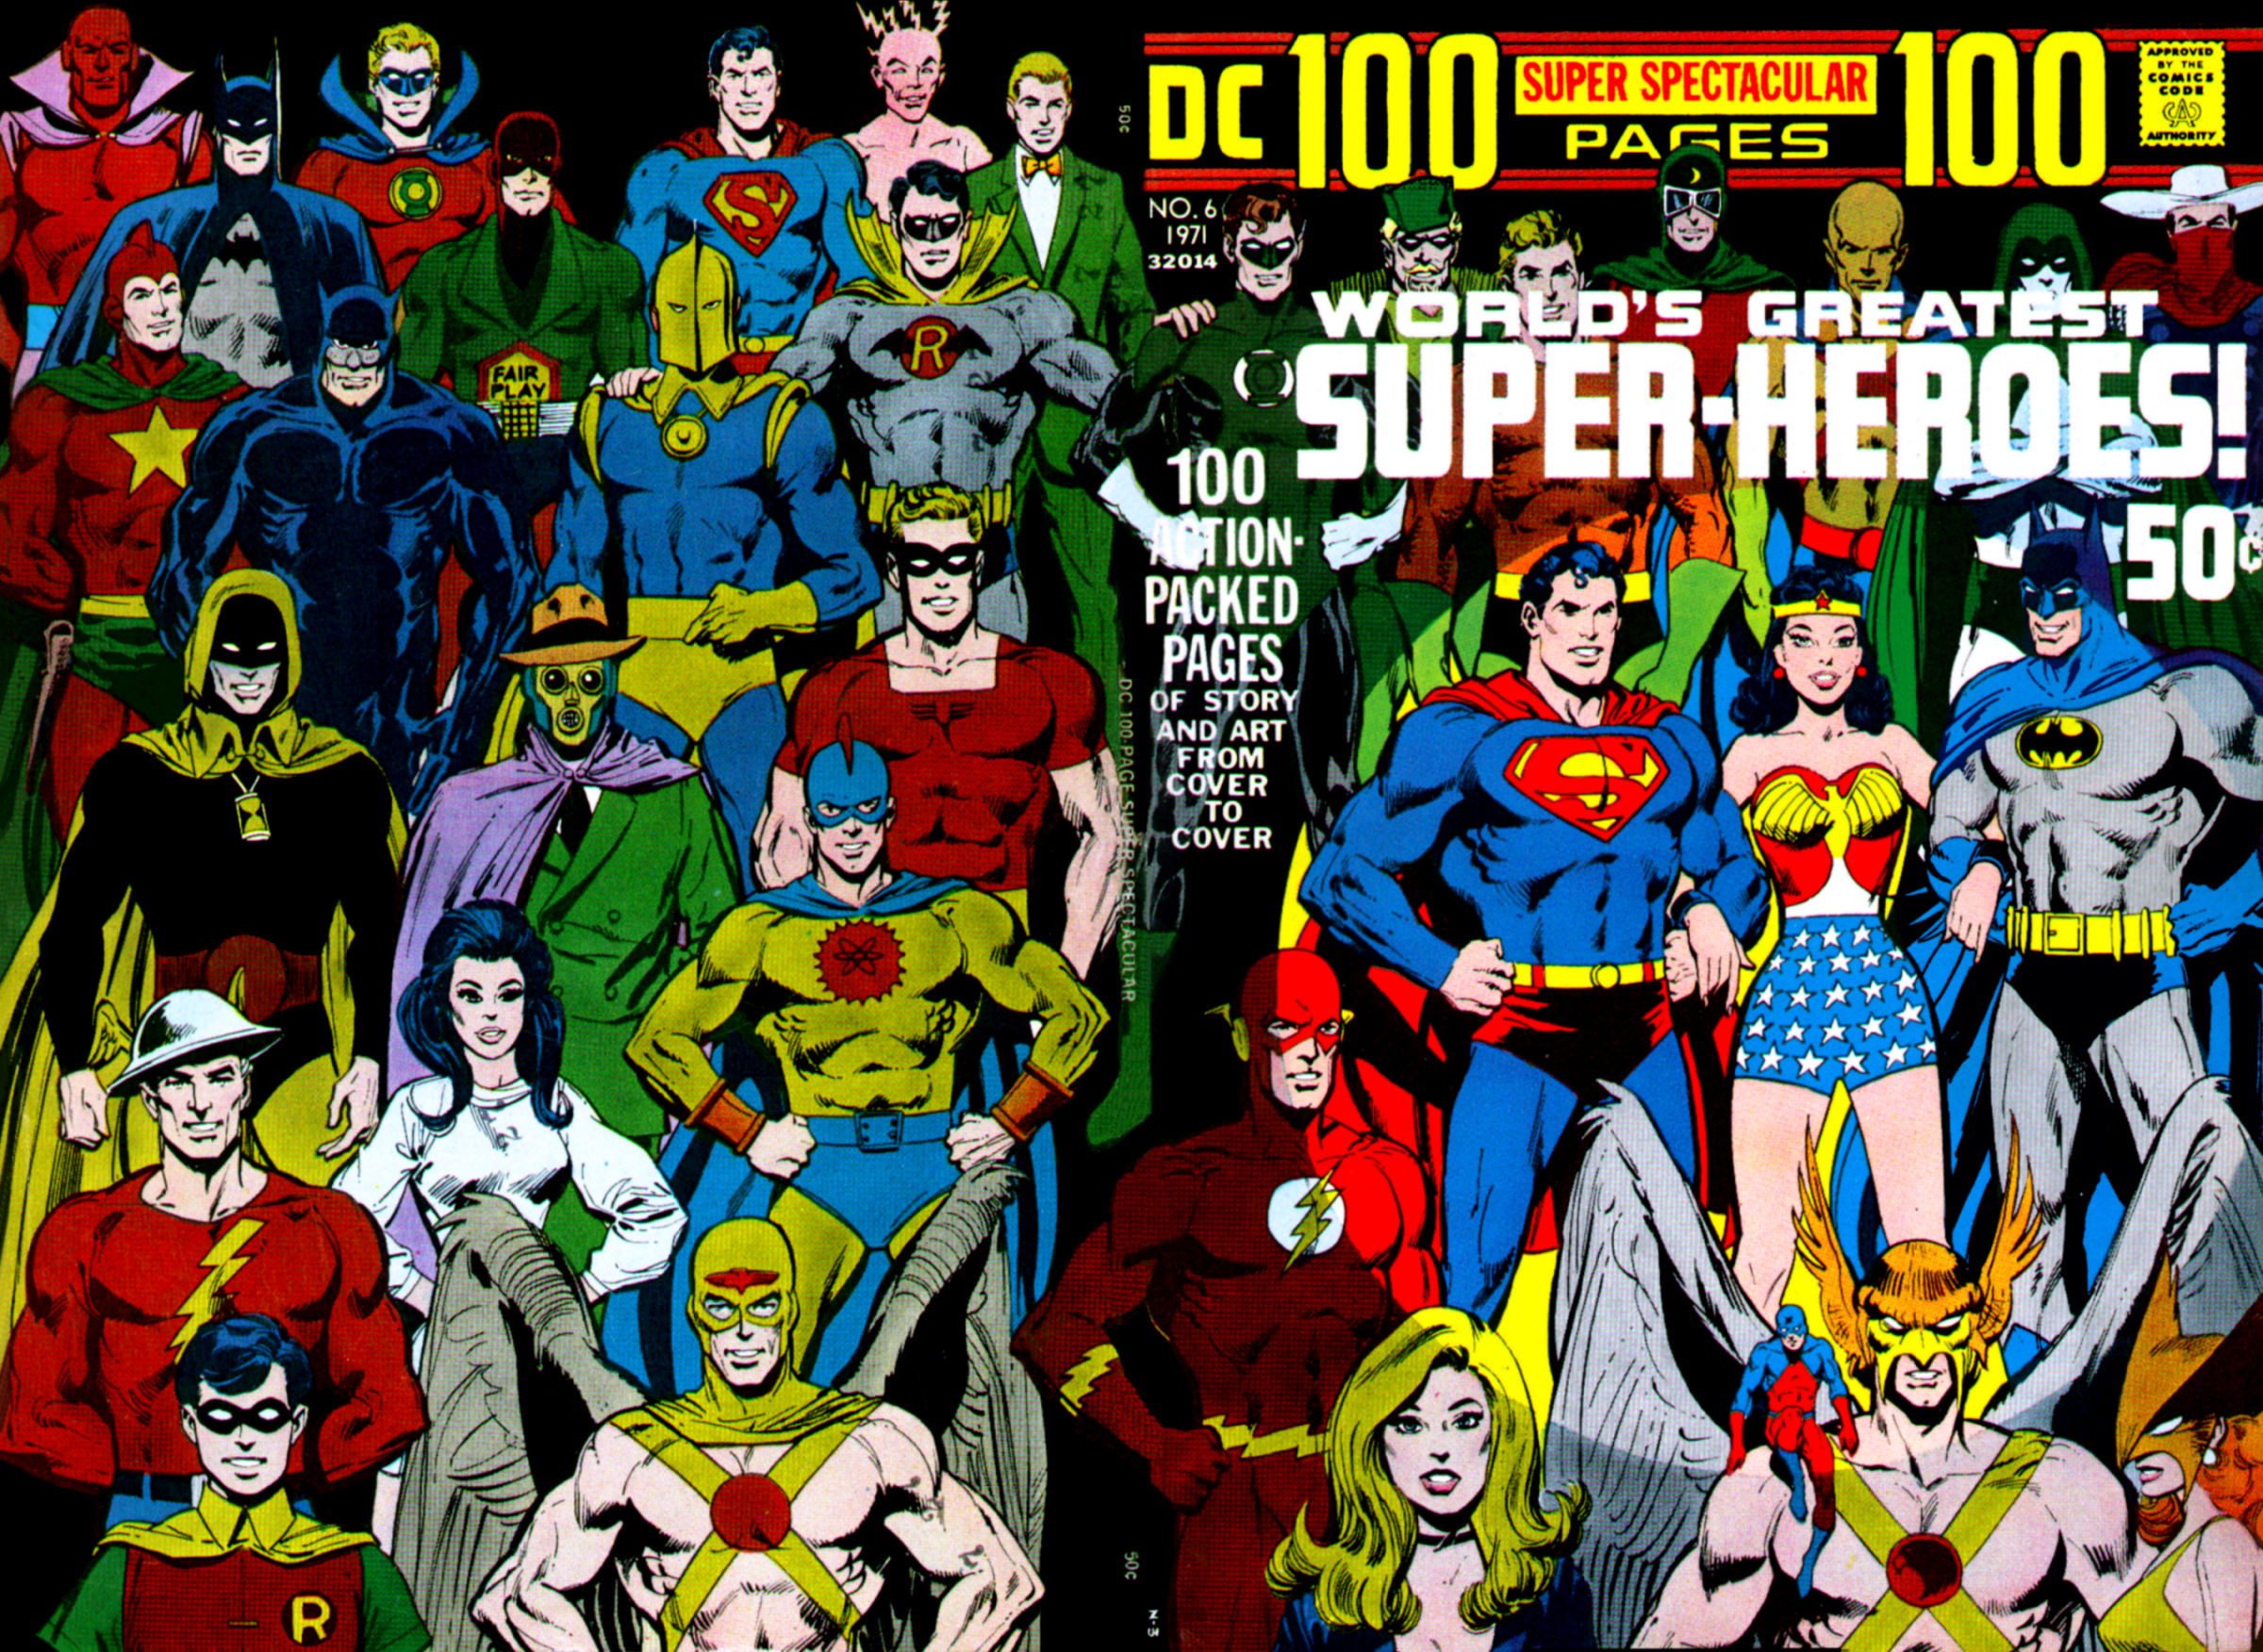 Stolthed Regn Nord DC 100 Page Super Spectaculars - The World's Greatest Super-Heroes!